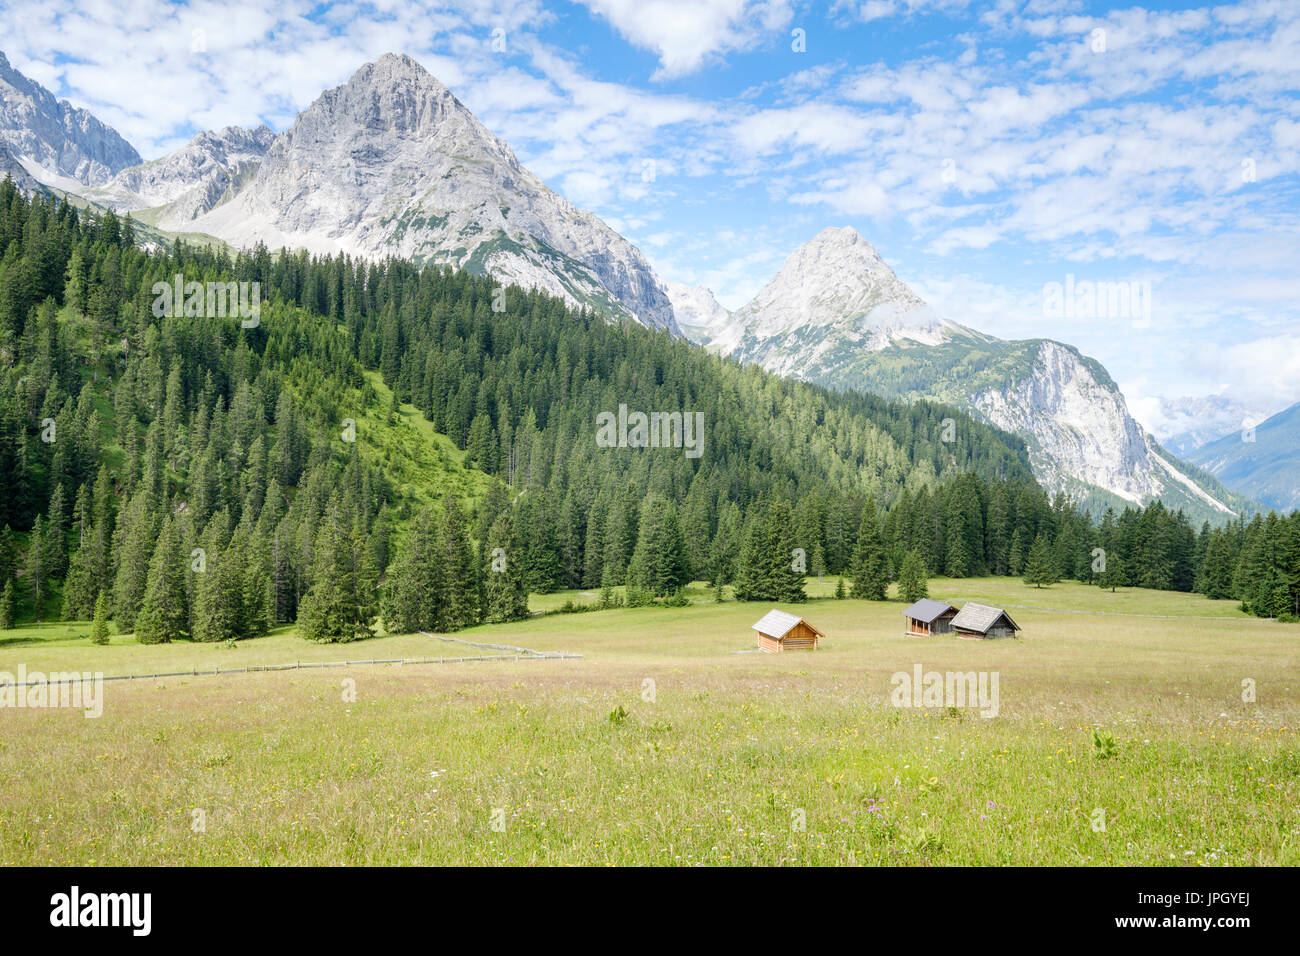 mountains and pasture by Ehrwalder Alm, Ehrwald, Tyrol, Austria Stock Photo